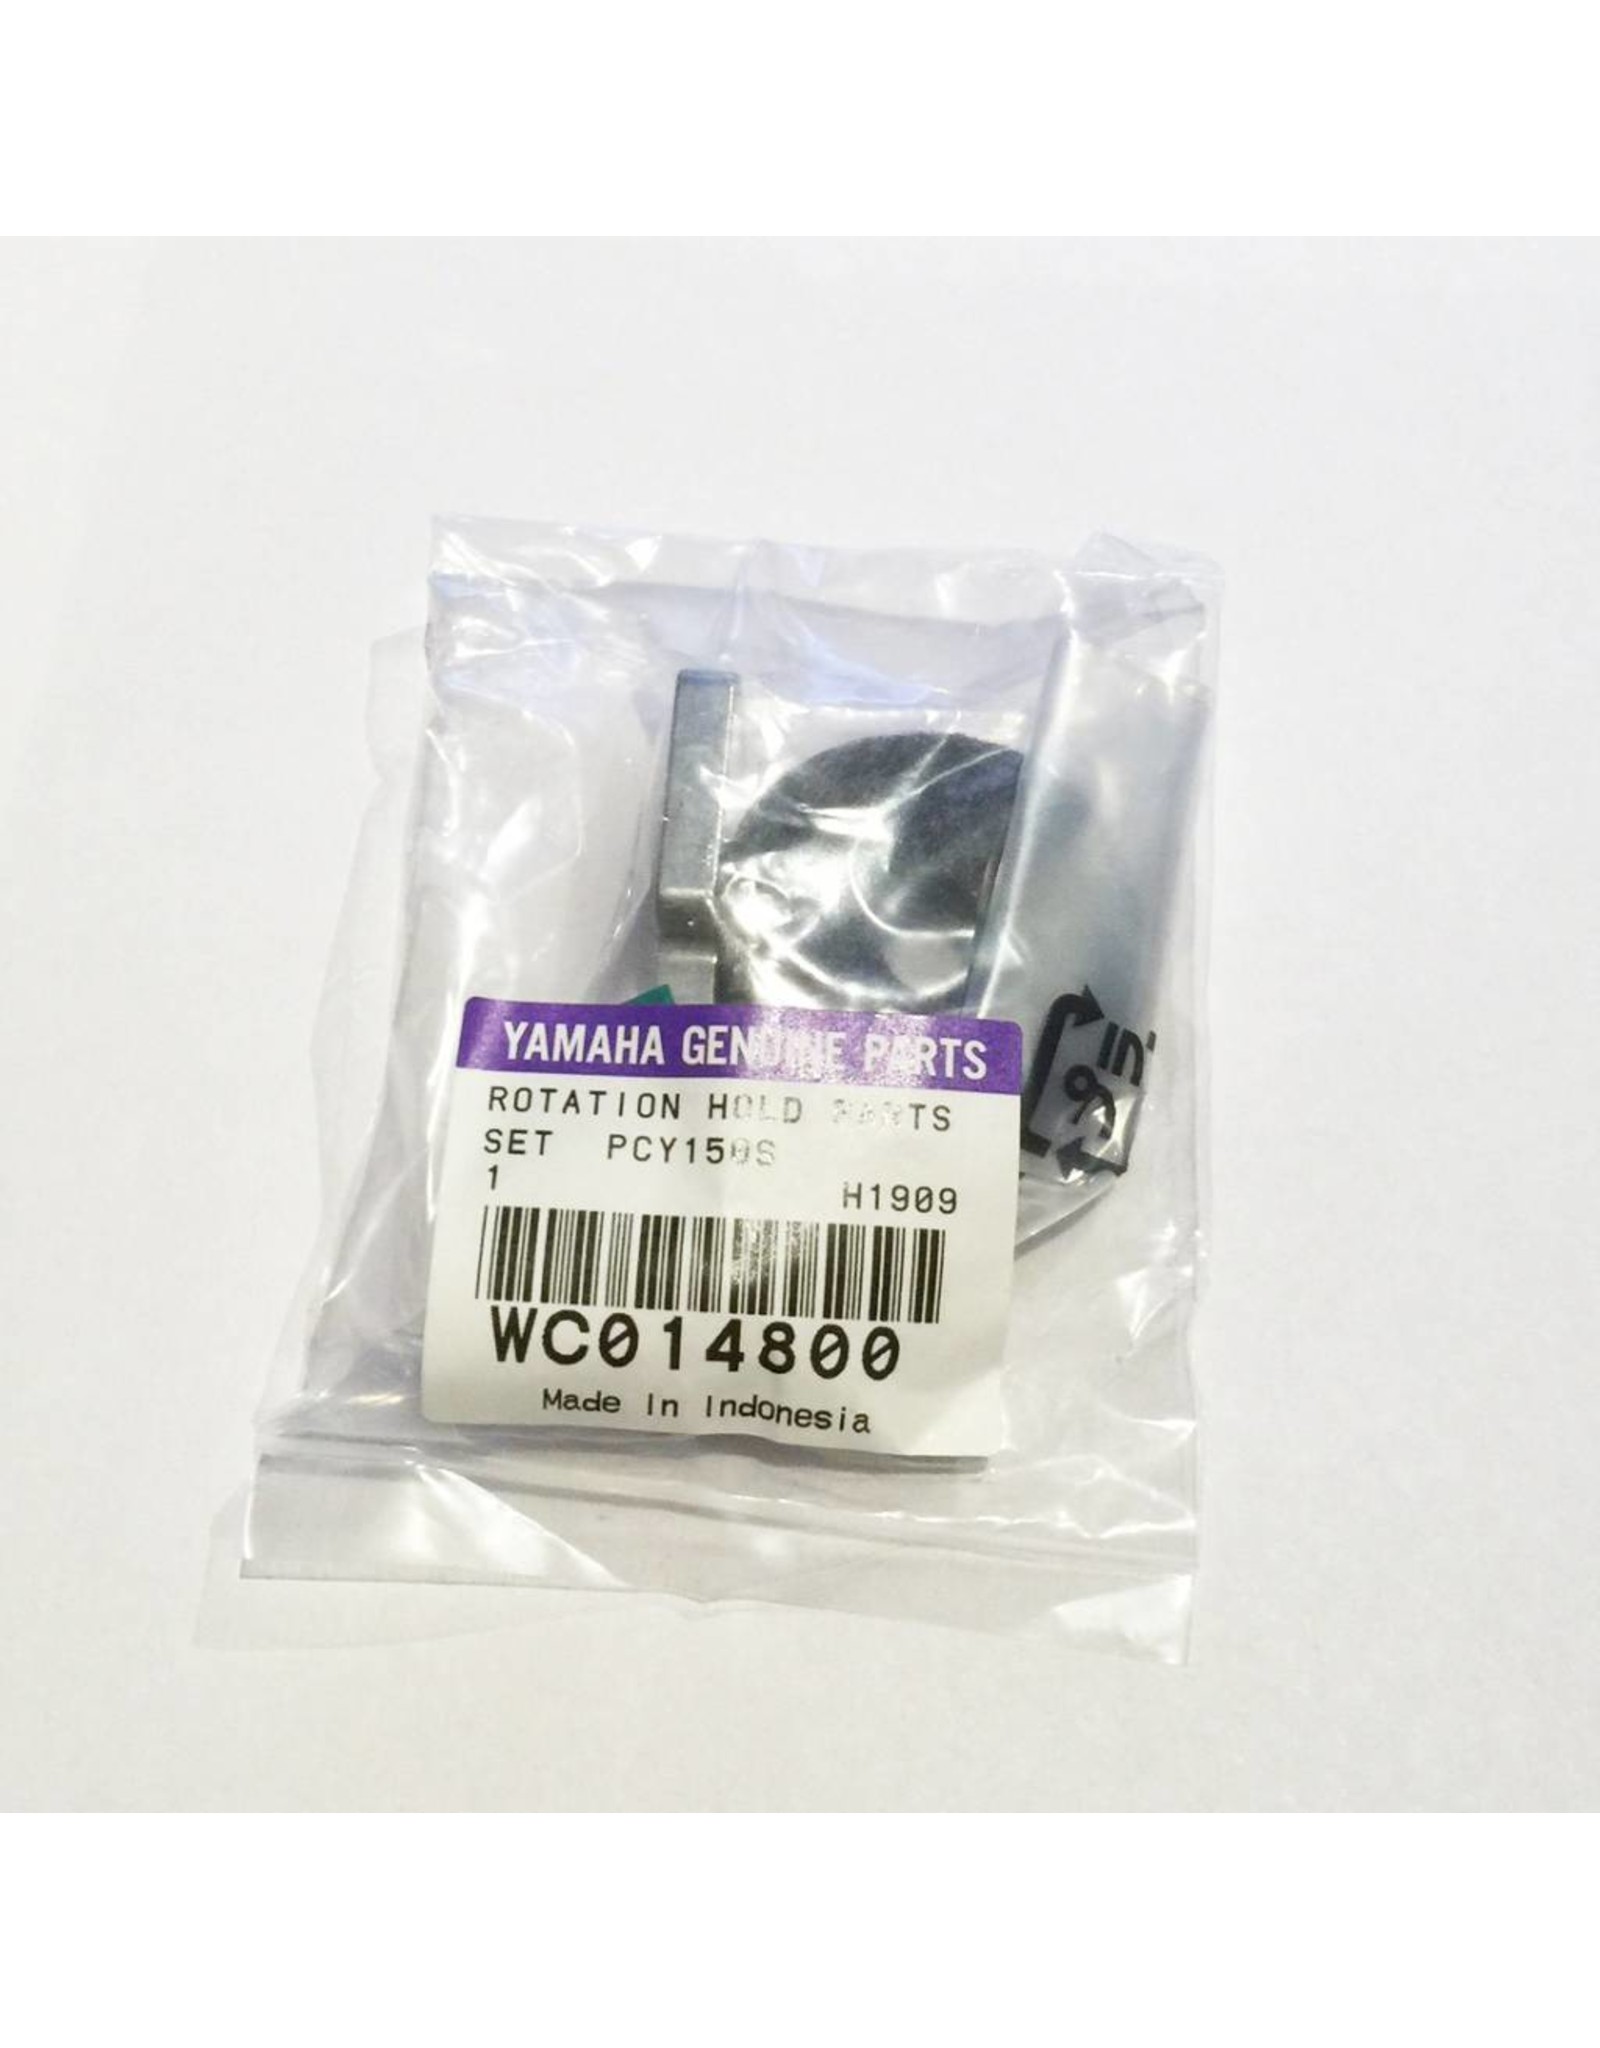 Yamaha  WC014800 rotation hold parts set for PCY150S